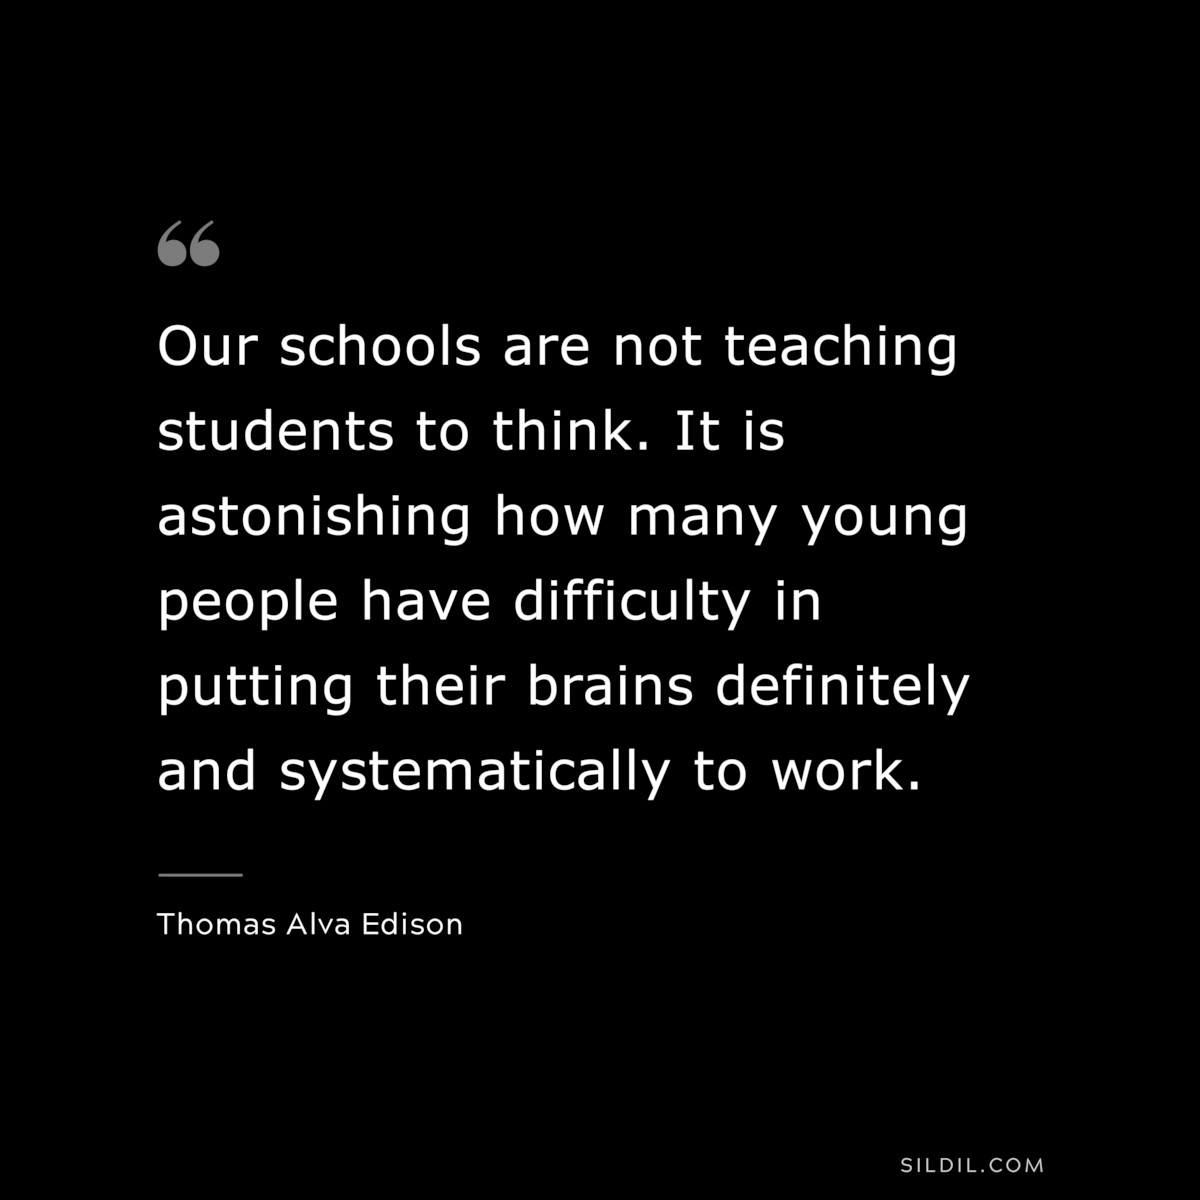 Our schools are not teaching students to think. It is astonishing how many young people have difficulty in putting their brains definitely and systematically to work. ― Thomas Alva Edison